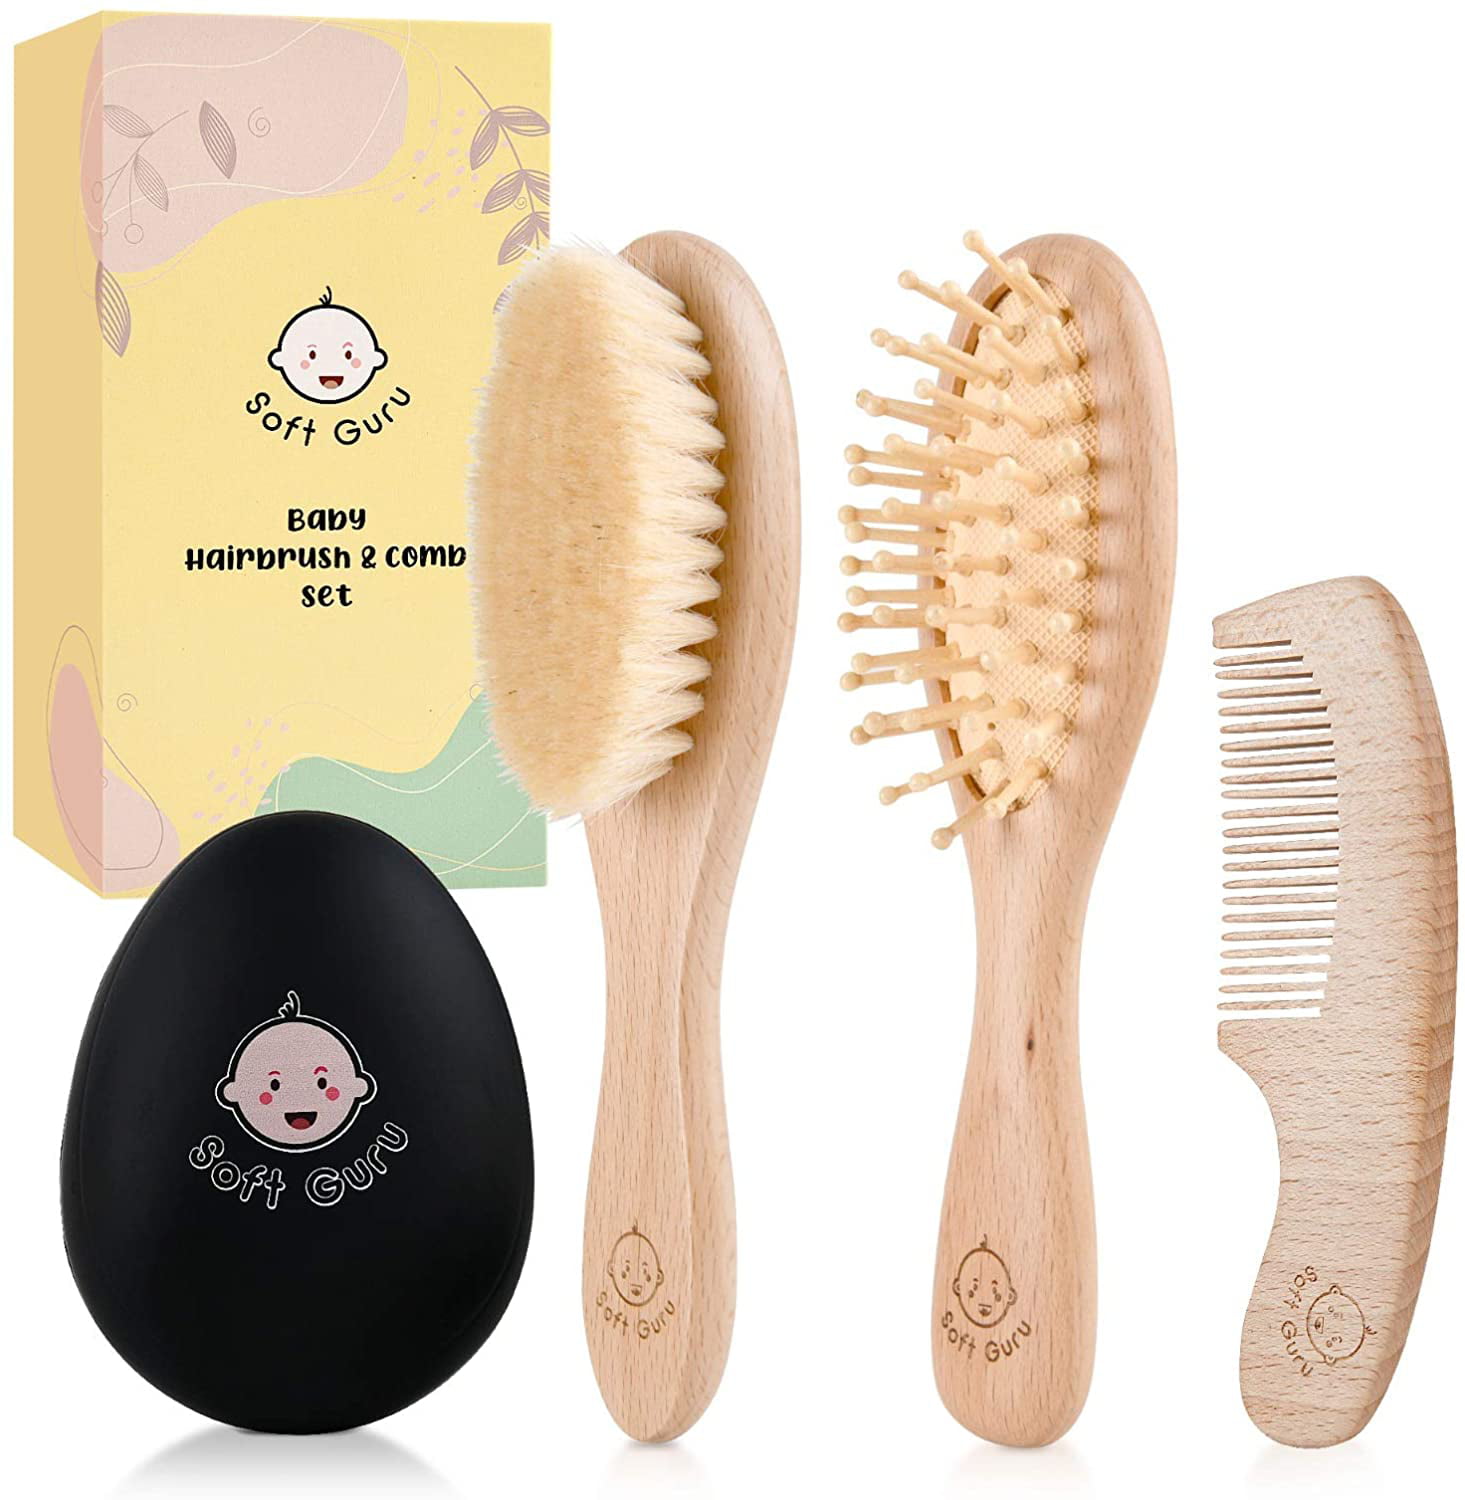 Soft Guru Baby Hair Brush and Comb Set with Premium Wooden Finish. Gentle  Bristles for Cradle Cap. Great Baby Registry or Shower Gift. Perfect for  Toddlers, Newborns & Infants. 